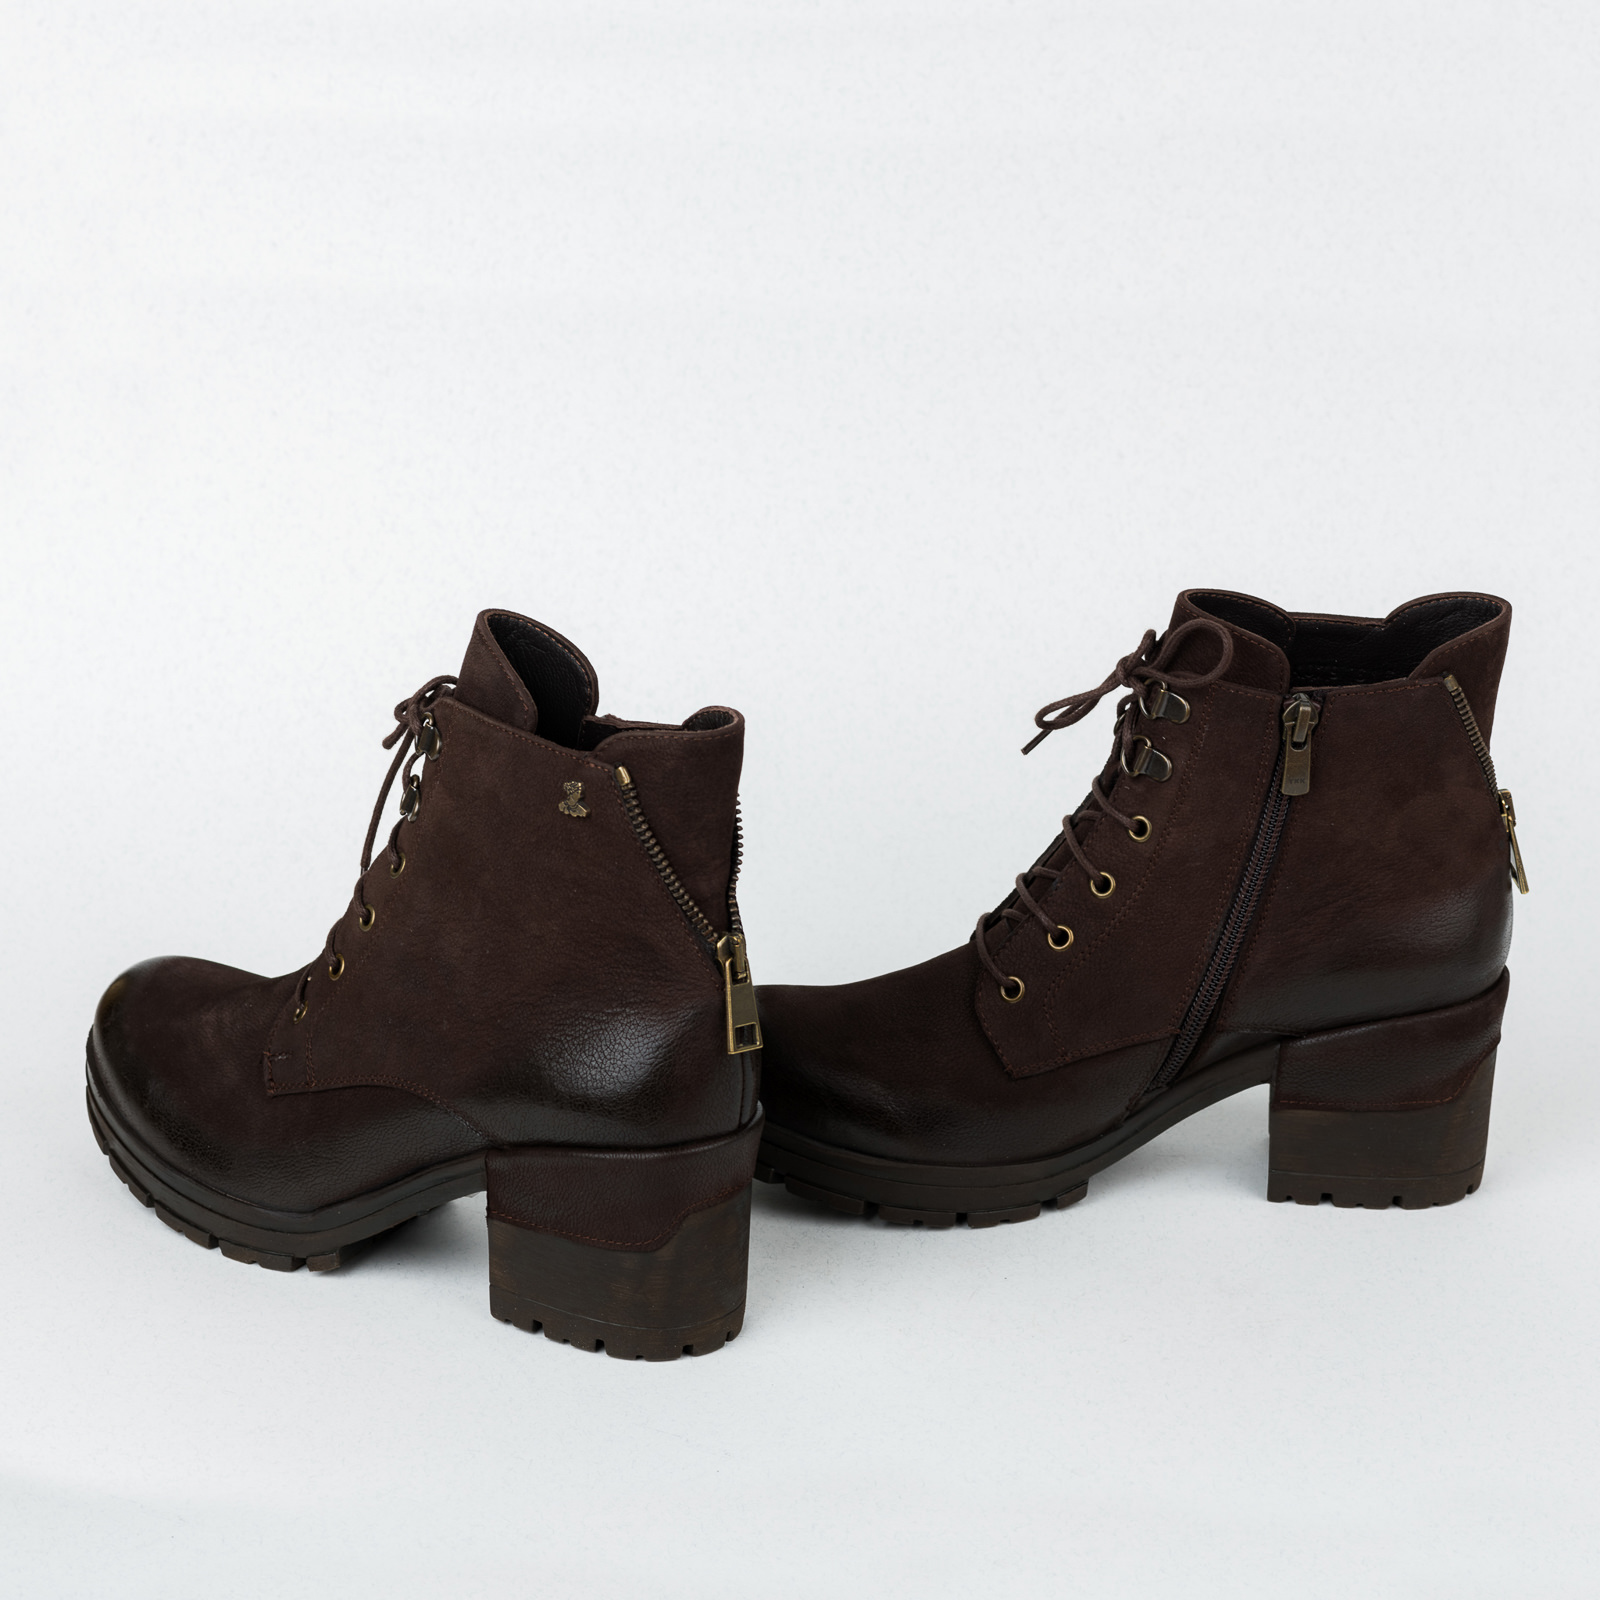 Leather ankle boots B431 - BROWN